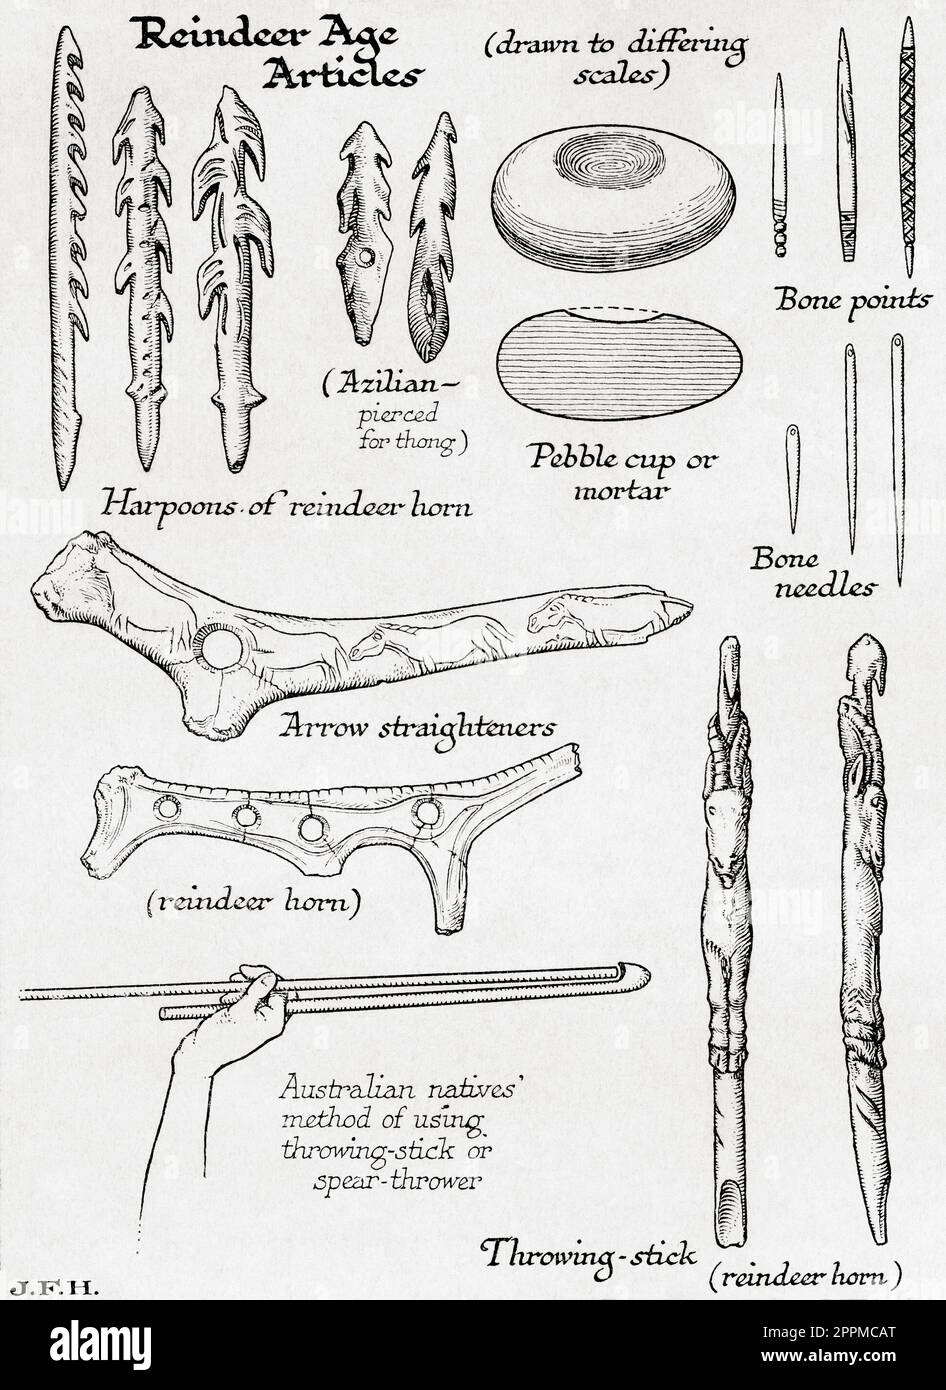 Reindeer Age articles including, harpoons of reindeer horn, azilian, pierced for thong, pebble cup or mortar, bone points, bone needles, arrow straighteners, reindeer horn, throwing stick, Australian native's method of using a throwing-stick or spear thrower.  From the book Outline of History by H.G. Wells, published 1920. Stock Photo